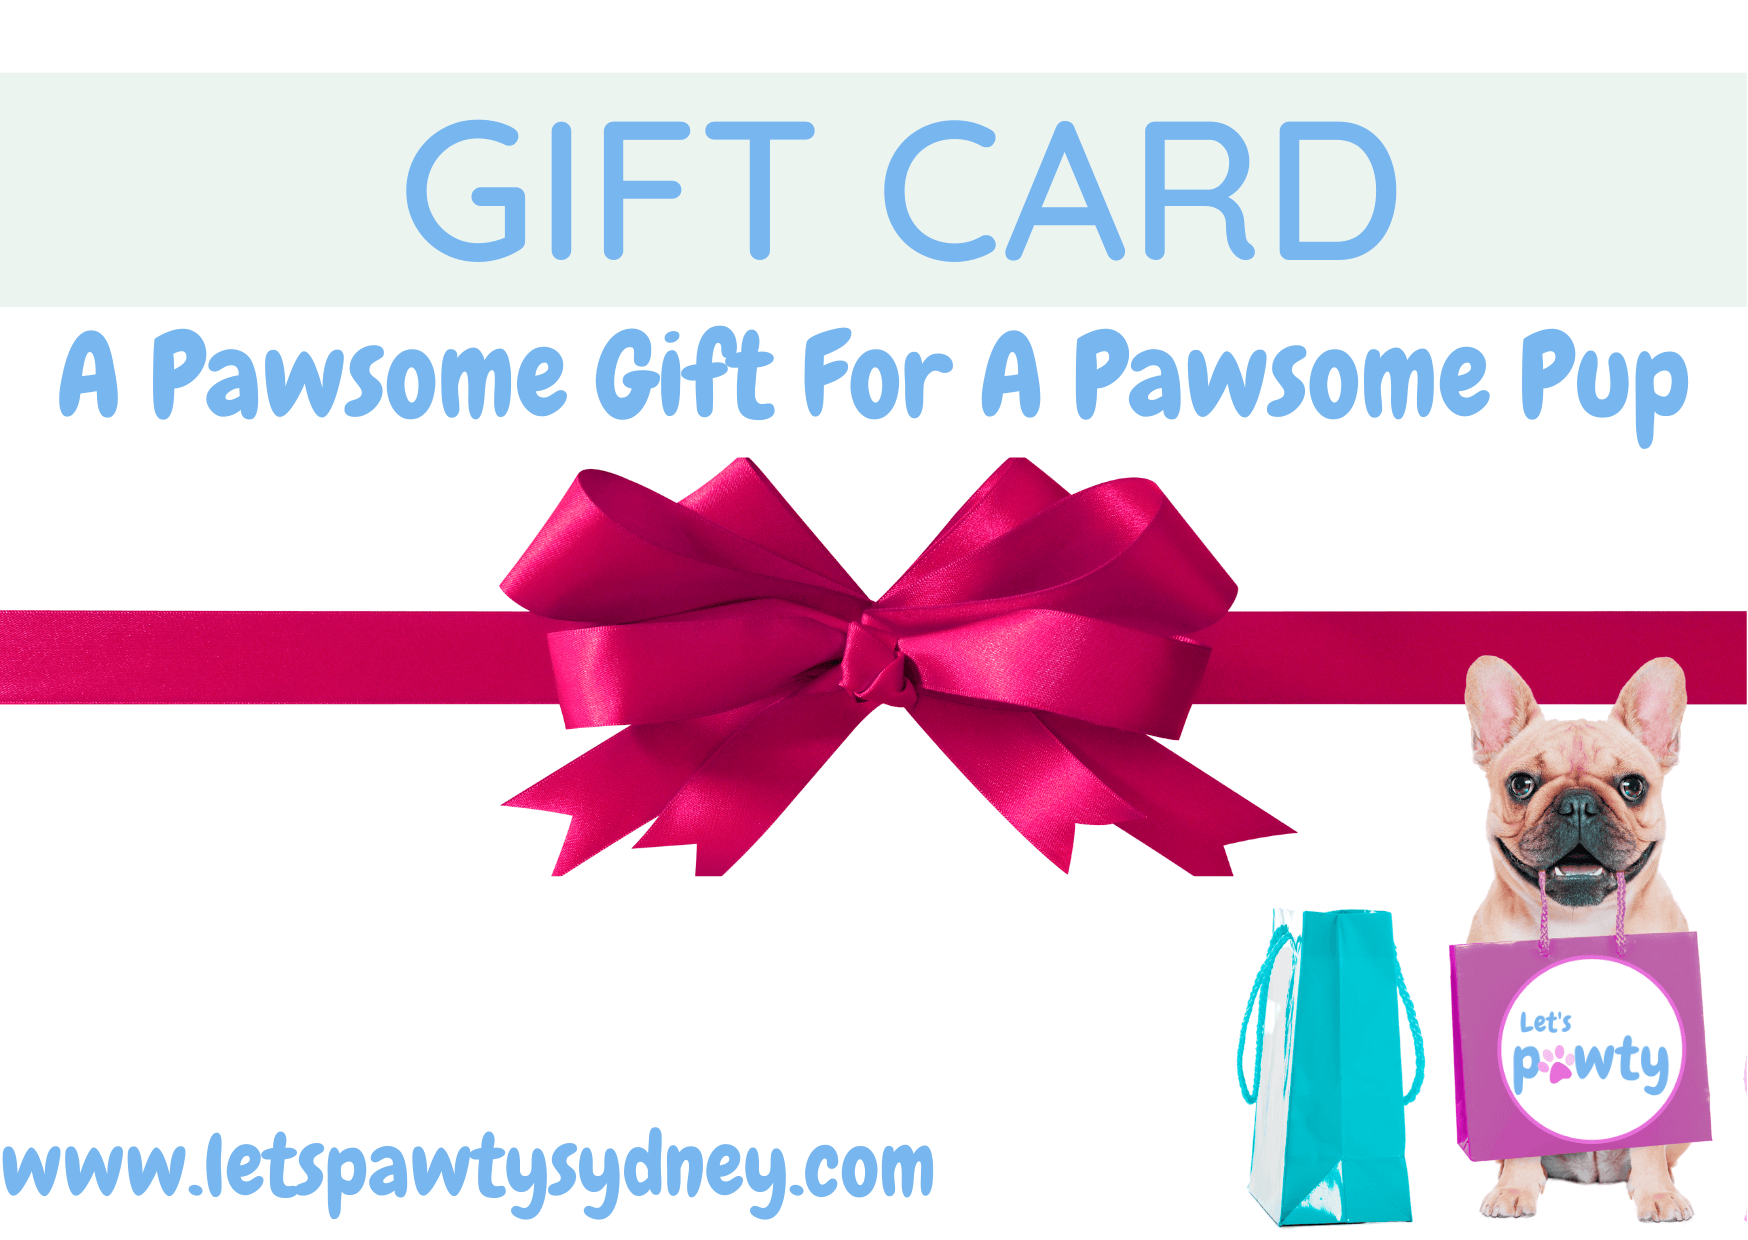 Let's Pawty Dog gift card, dog products, dog toys, dog accessories  Edit alt text